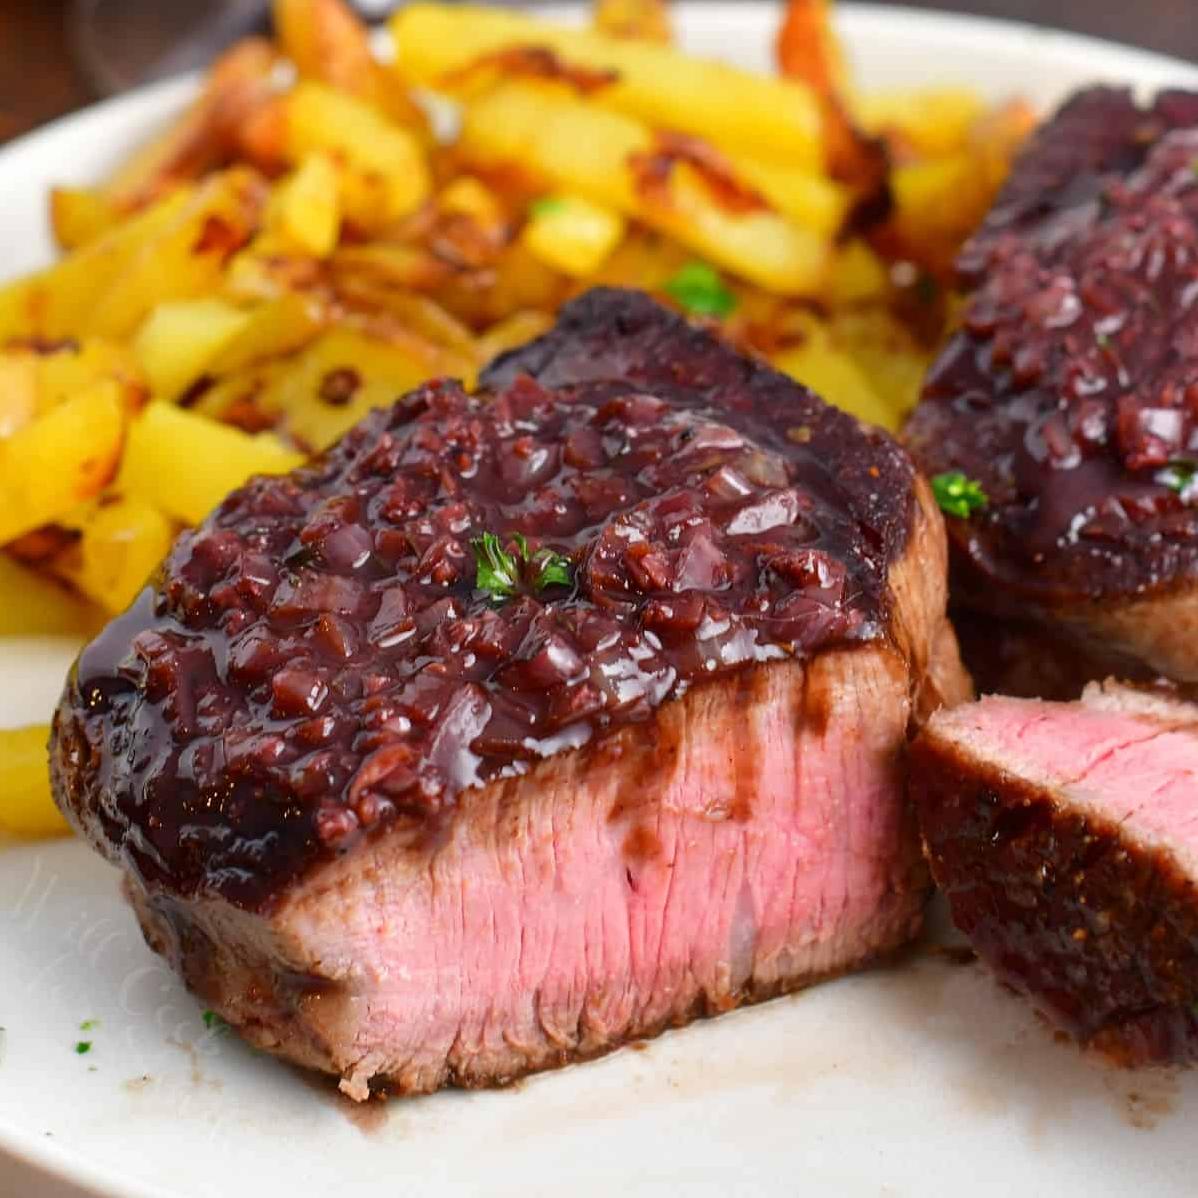  Bring restaurant-quality steak to your dinner table with this easy-to-follow recipe